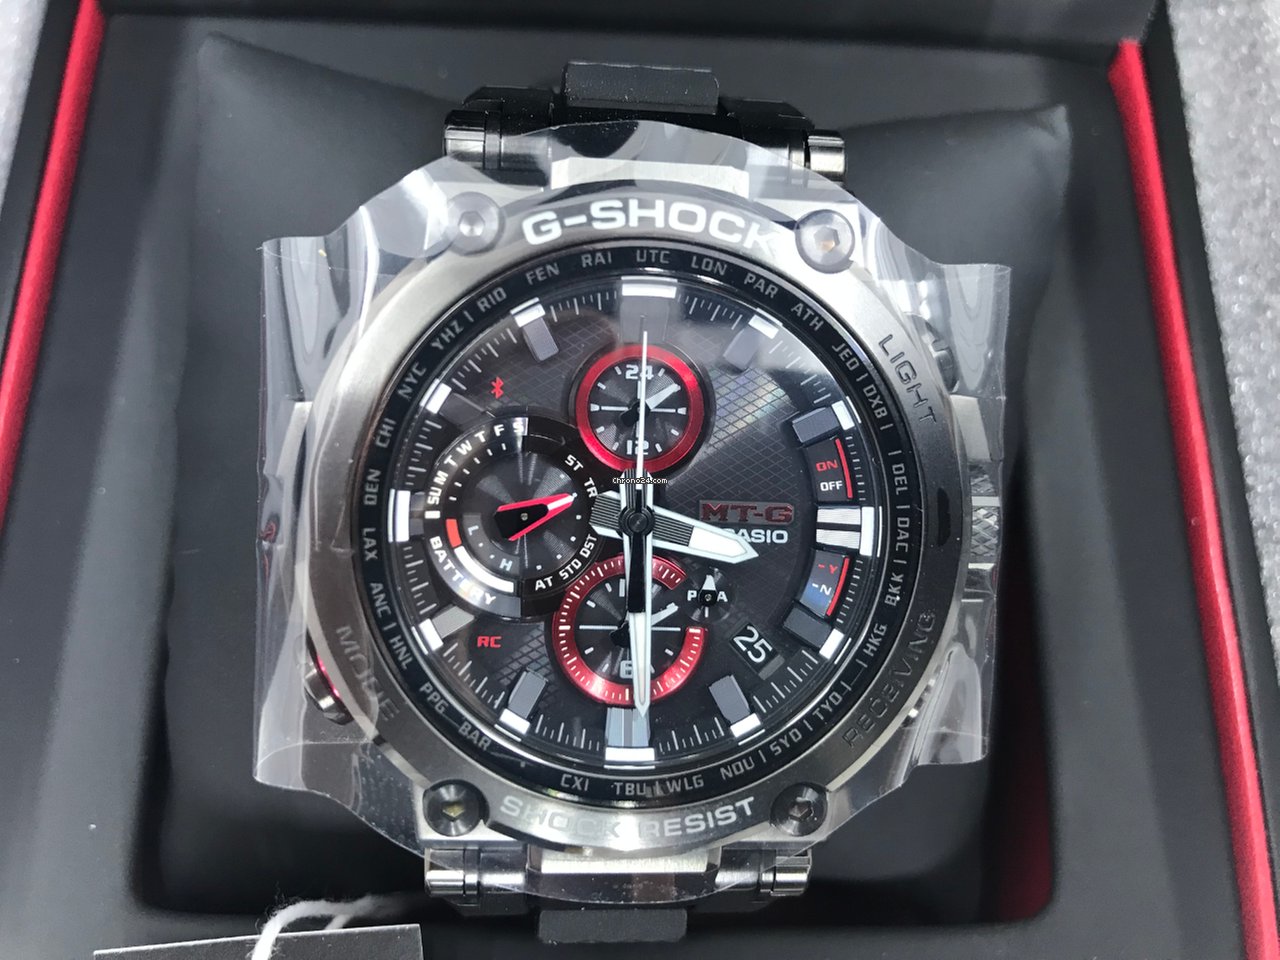 Casio G-Shock Watches- Designed For Resistance